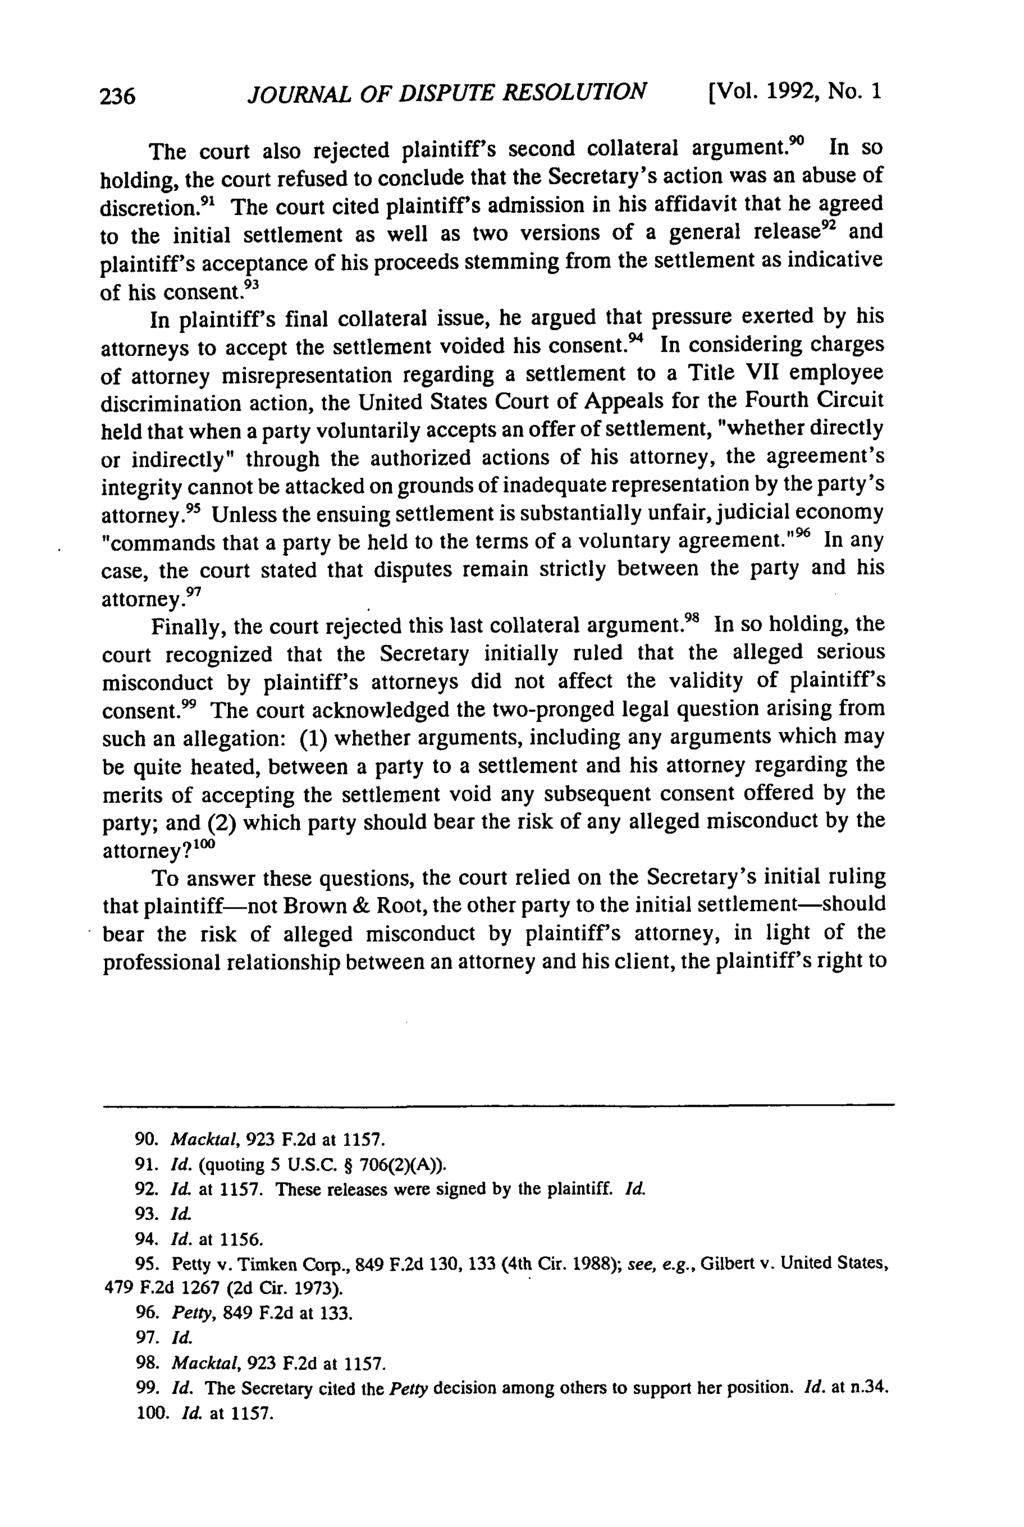 Journal of Dispute Resolution, Vol. 1992, Iss. 1 [1992], Art. 13 JOURNAL OF DISPUTE RESOLUTION [Vol. 1992, No. 1 The court also rejected plaintiff's second collateral argument.